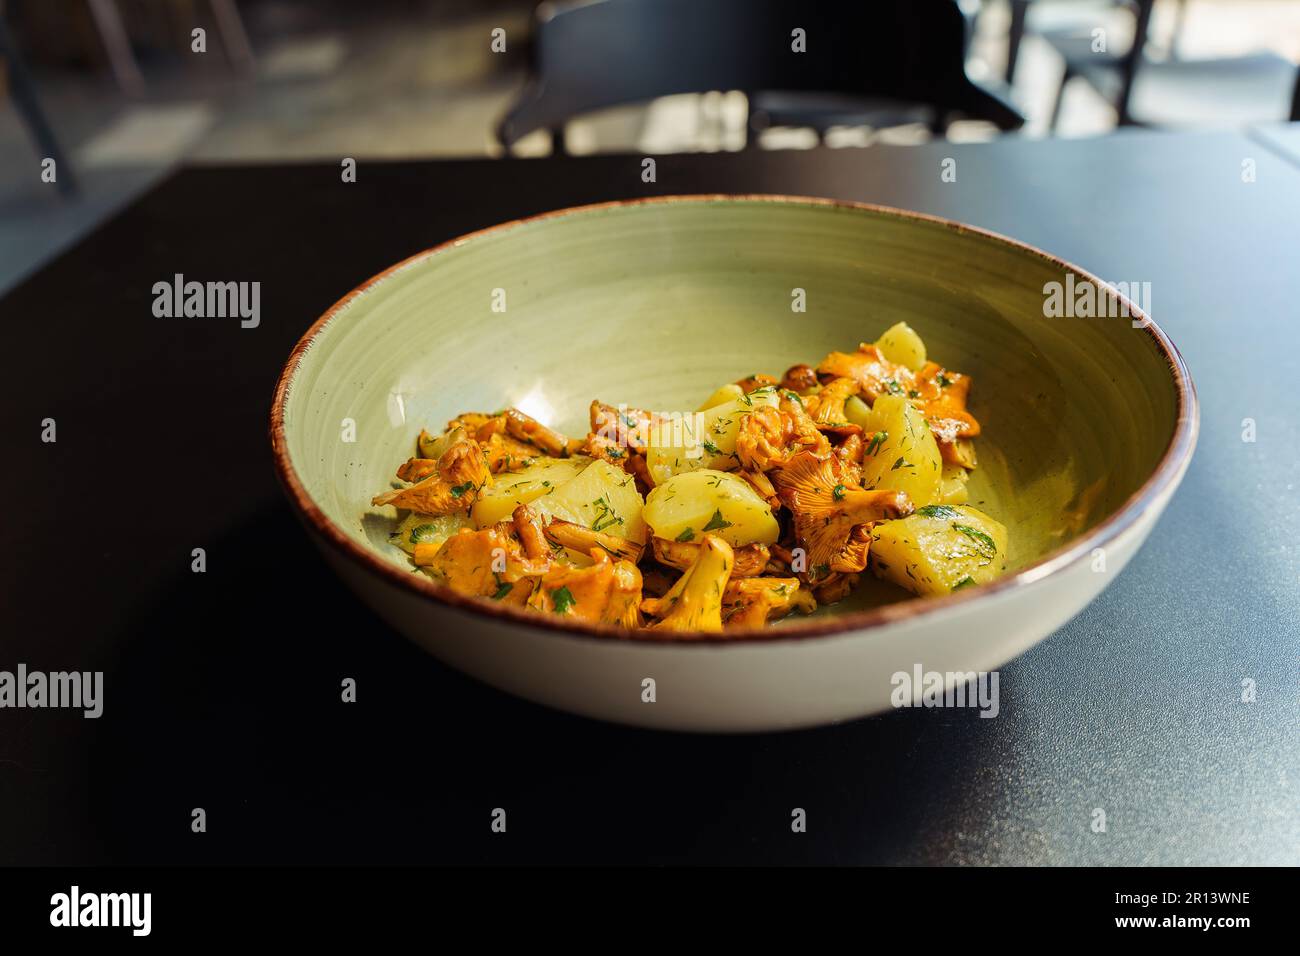 Fried chanterelles with boiled potatoes and green herbs, parsley and dill in a bowl for lunch. Stock Photo